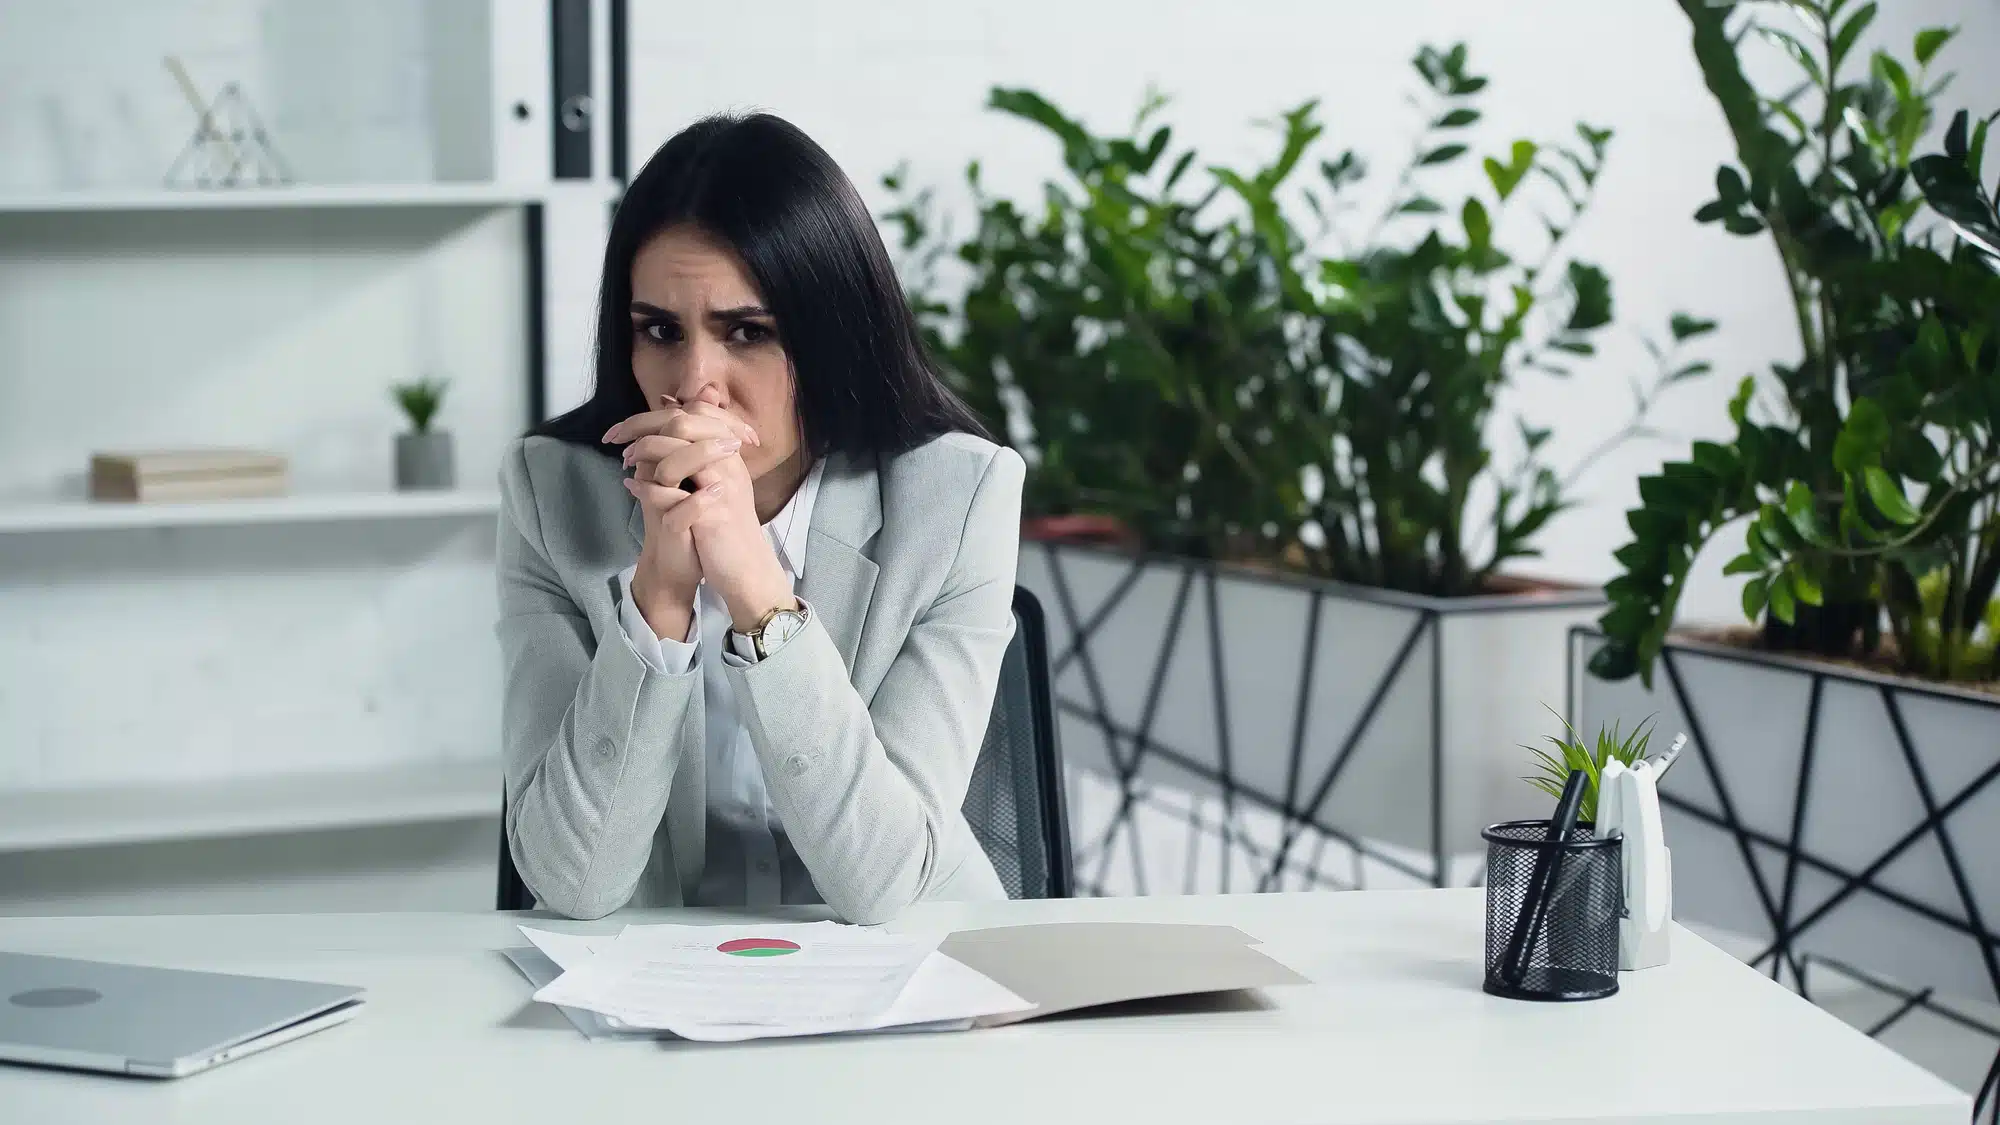 Upset woman in office at work desk